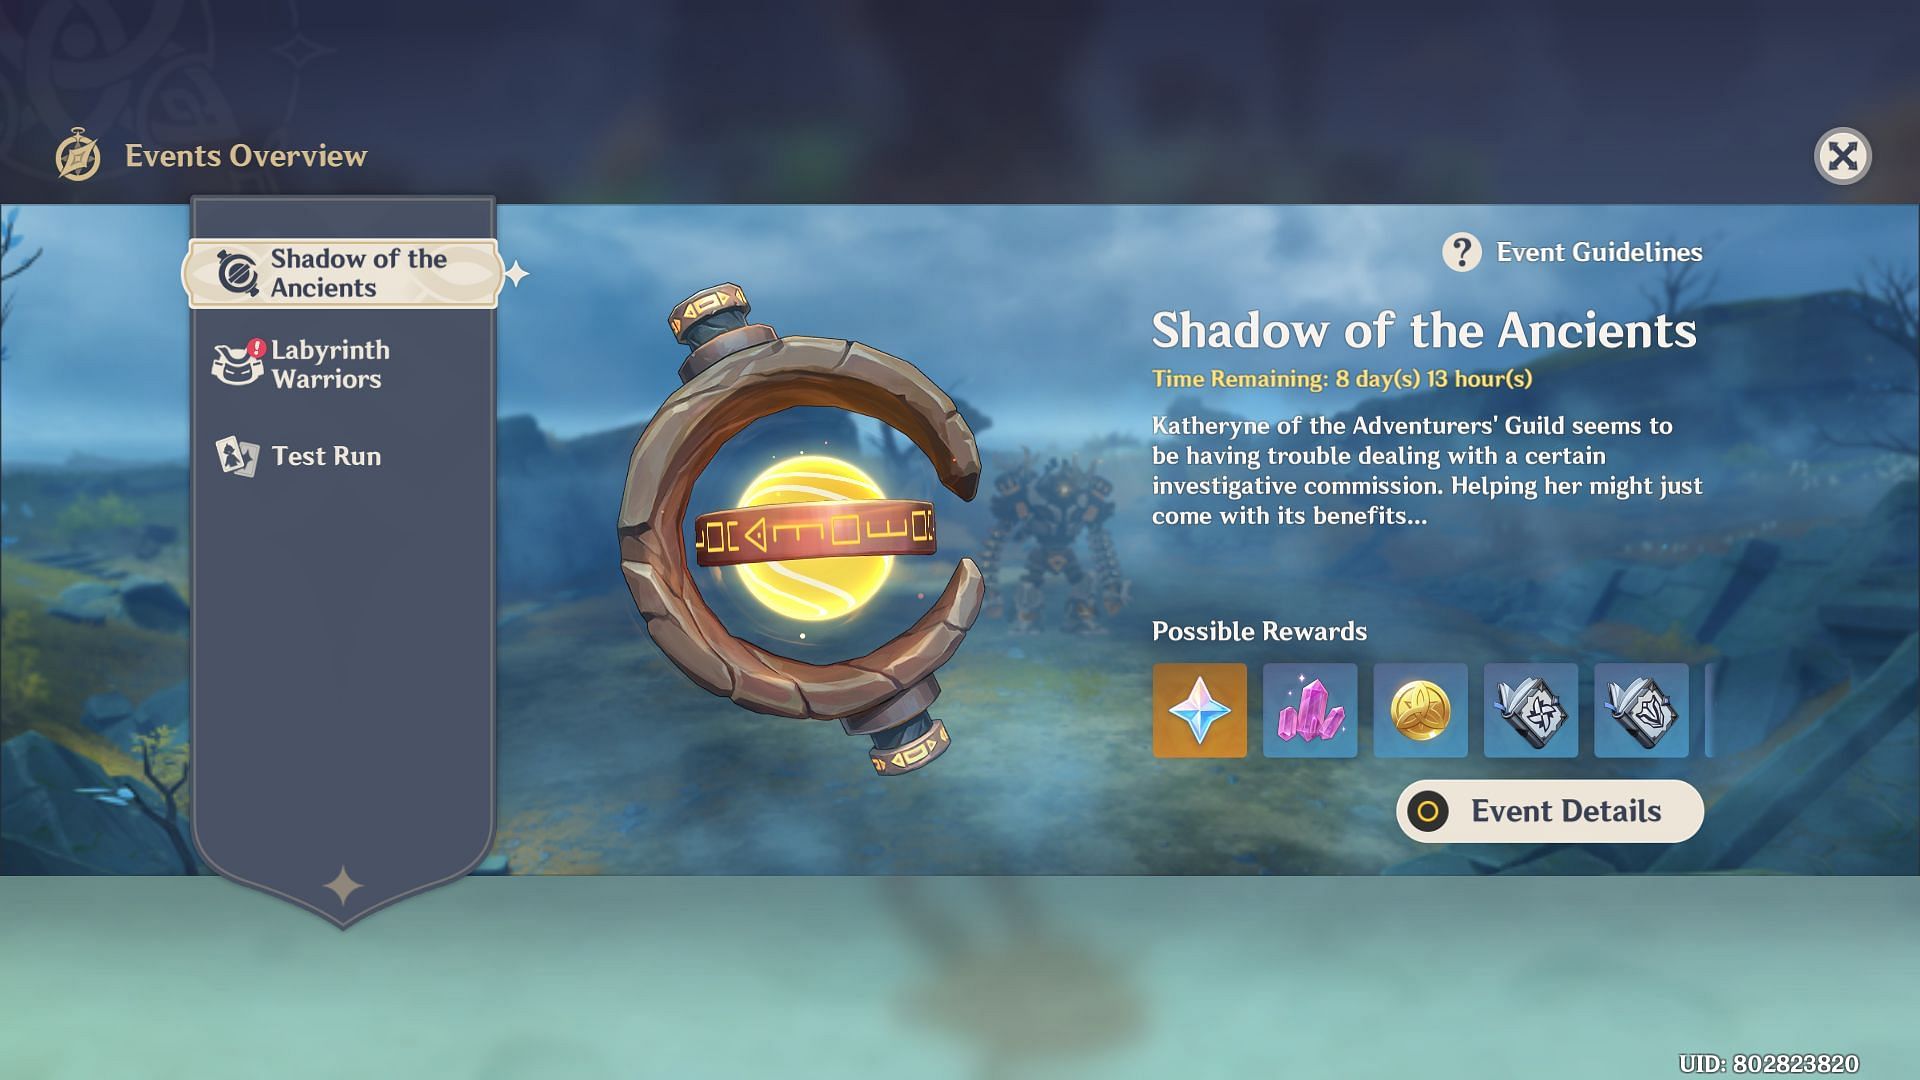 Shadow of the Ancients event page (Image via Genshin Impact)